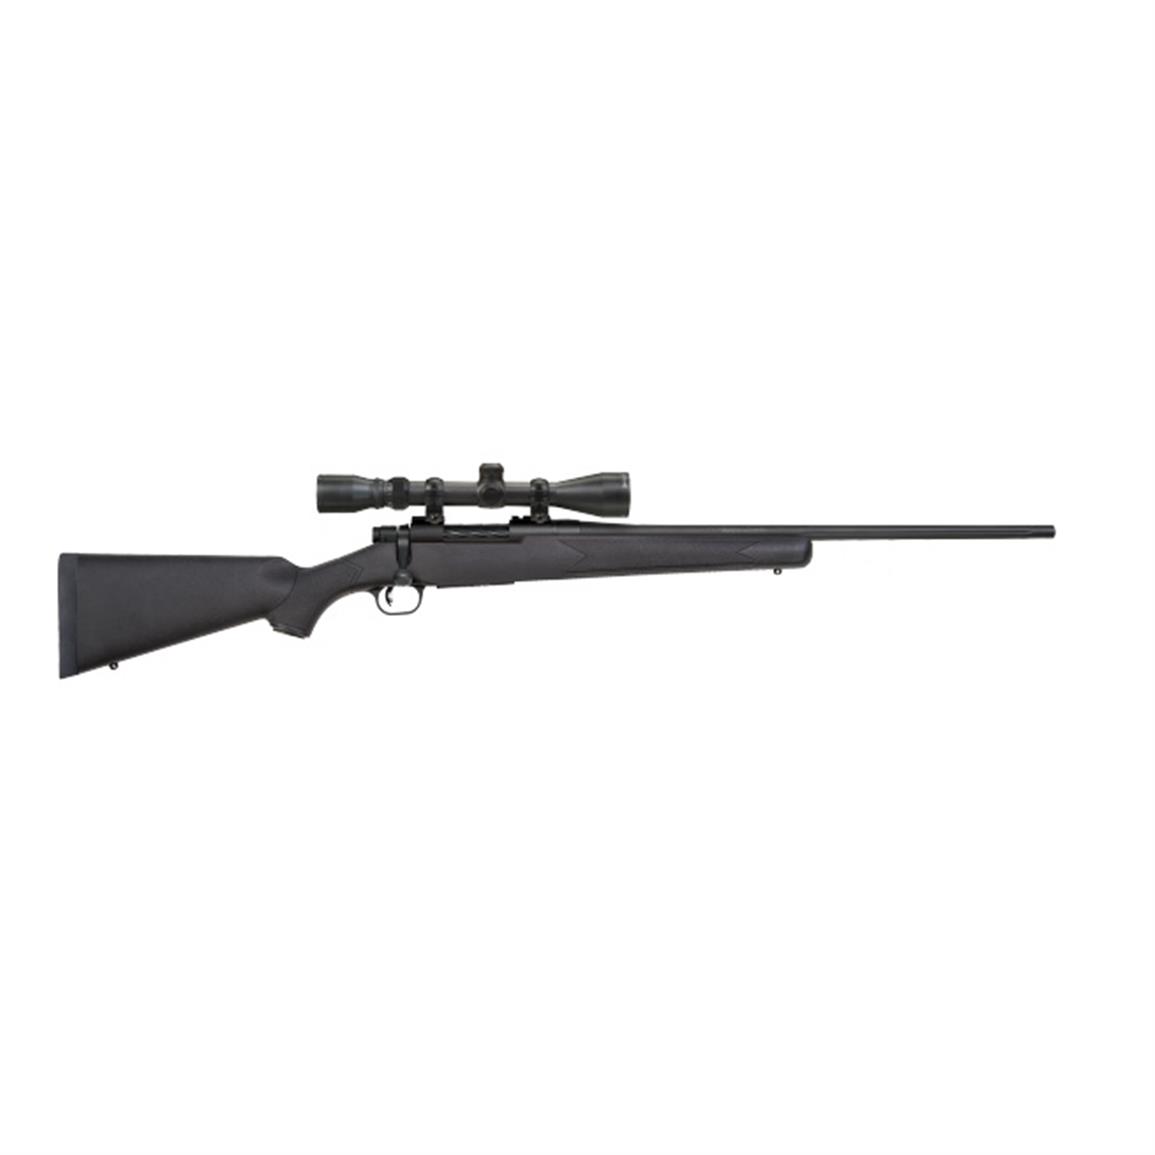 Mossberg Patriot Combo, Bolt Action, .270 Winchester, 22" Barrel, 3-9x40mm Scope, 5+1 Rounds